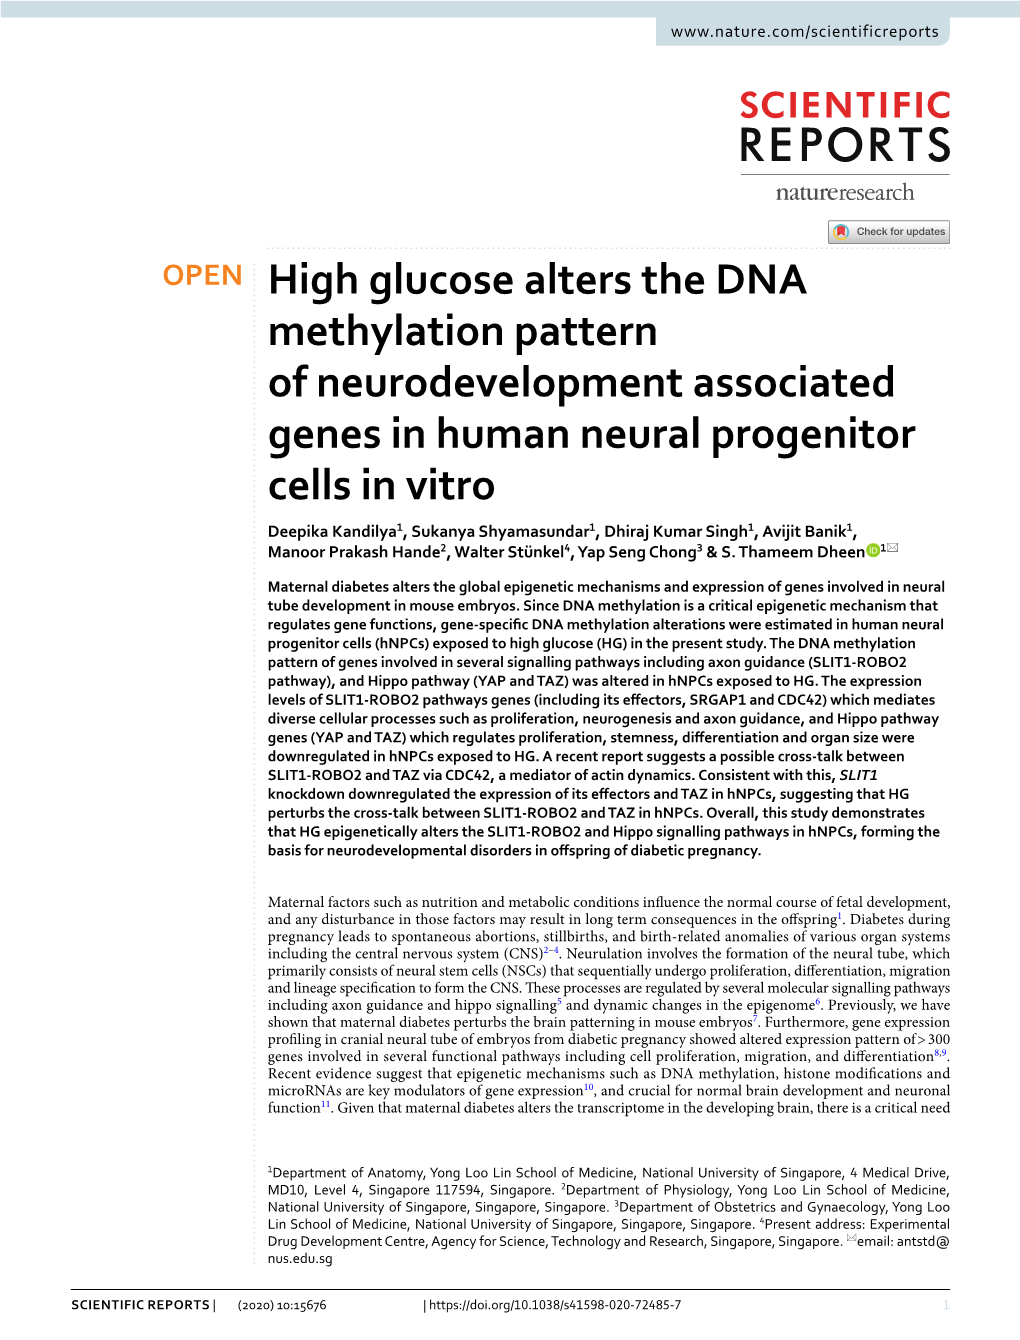 High Glucose Alters the DNA Methylation Pattern Of